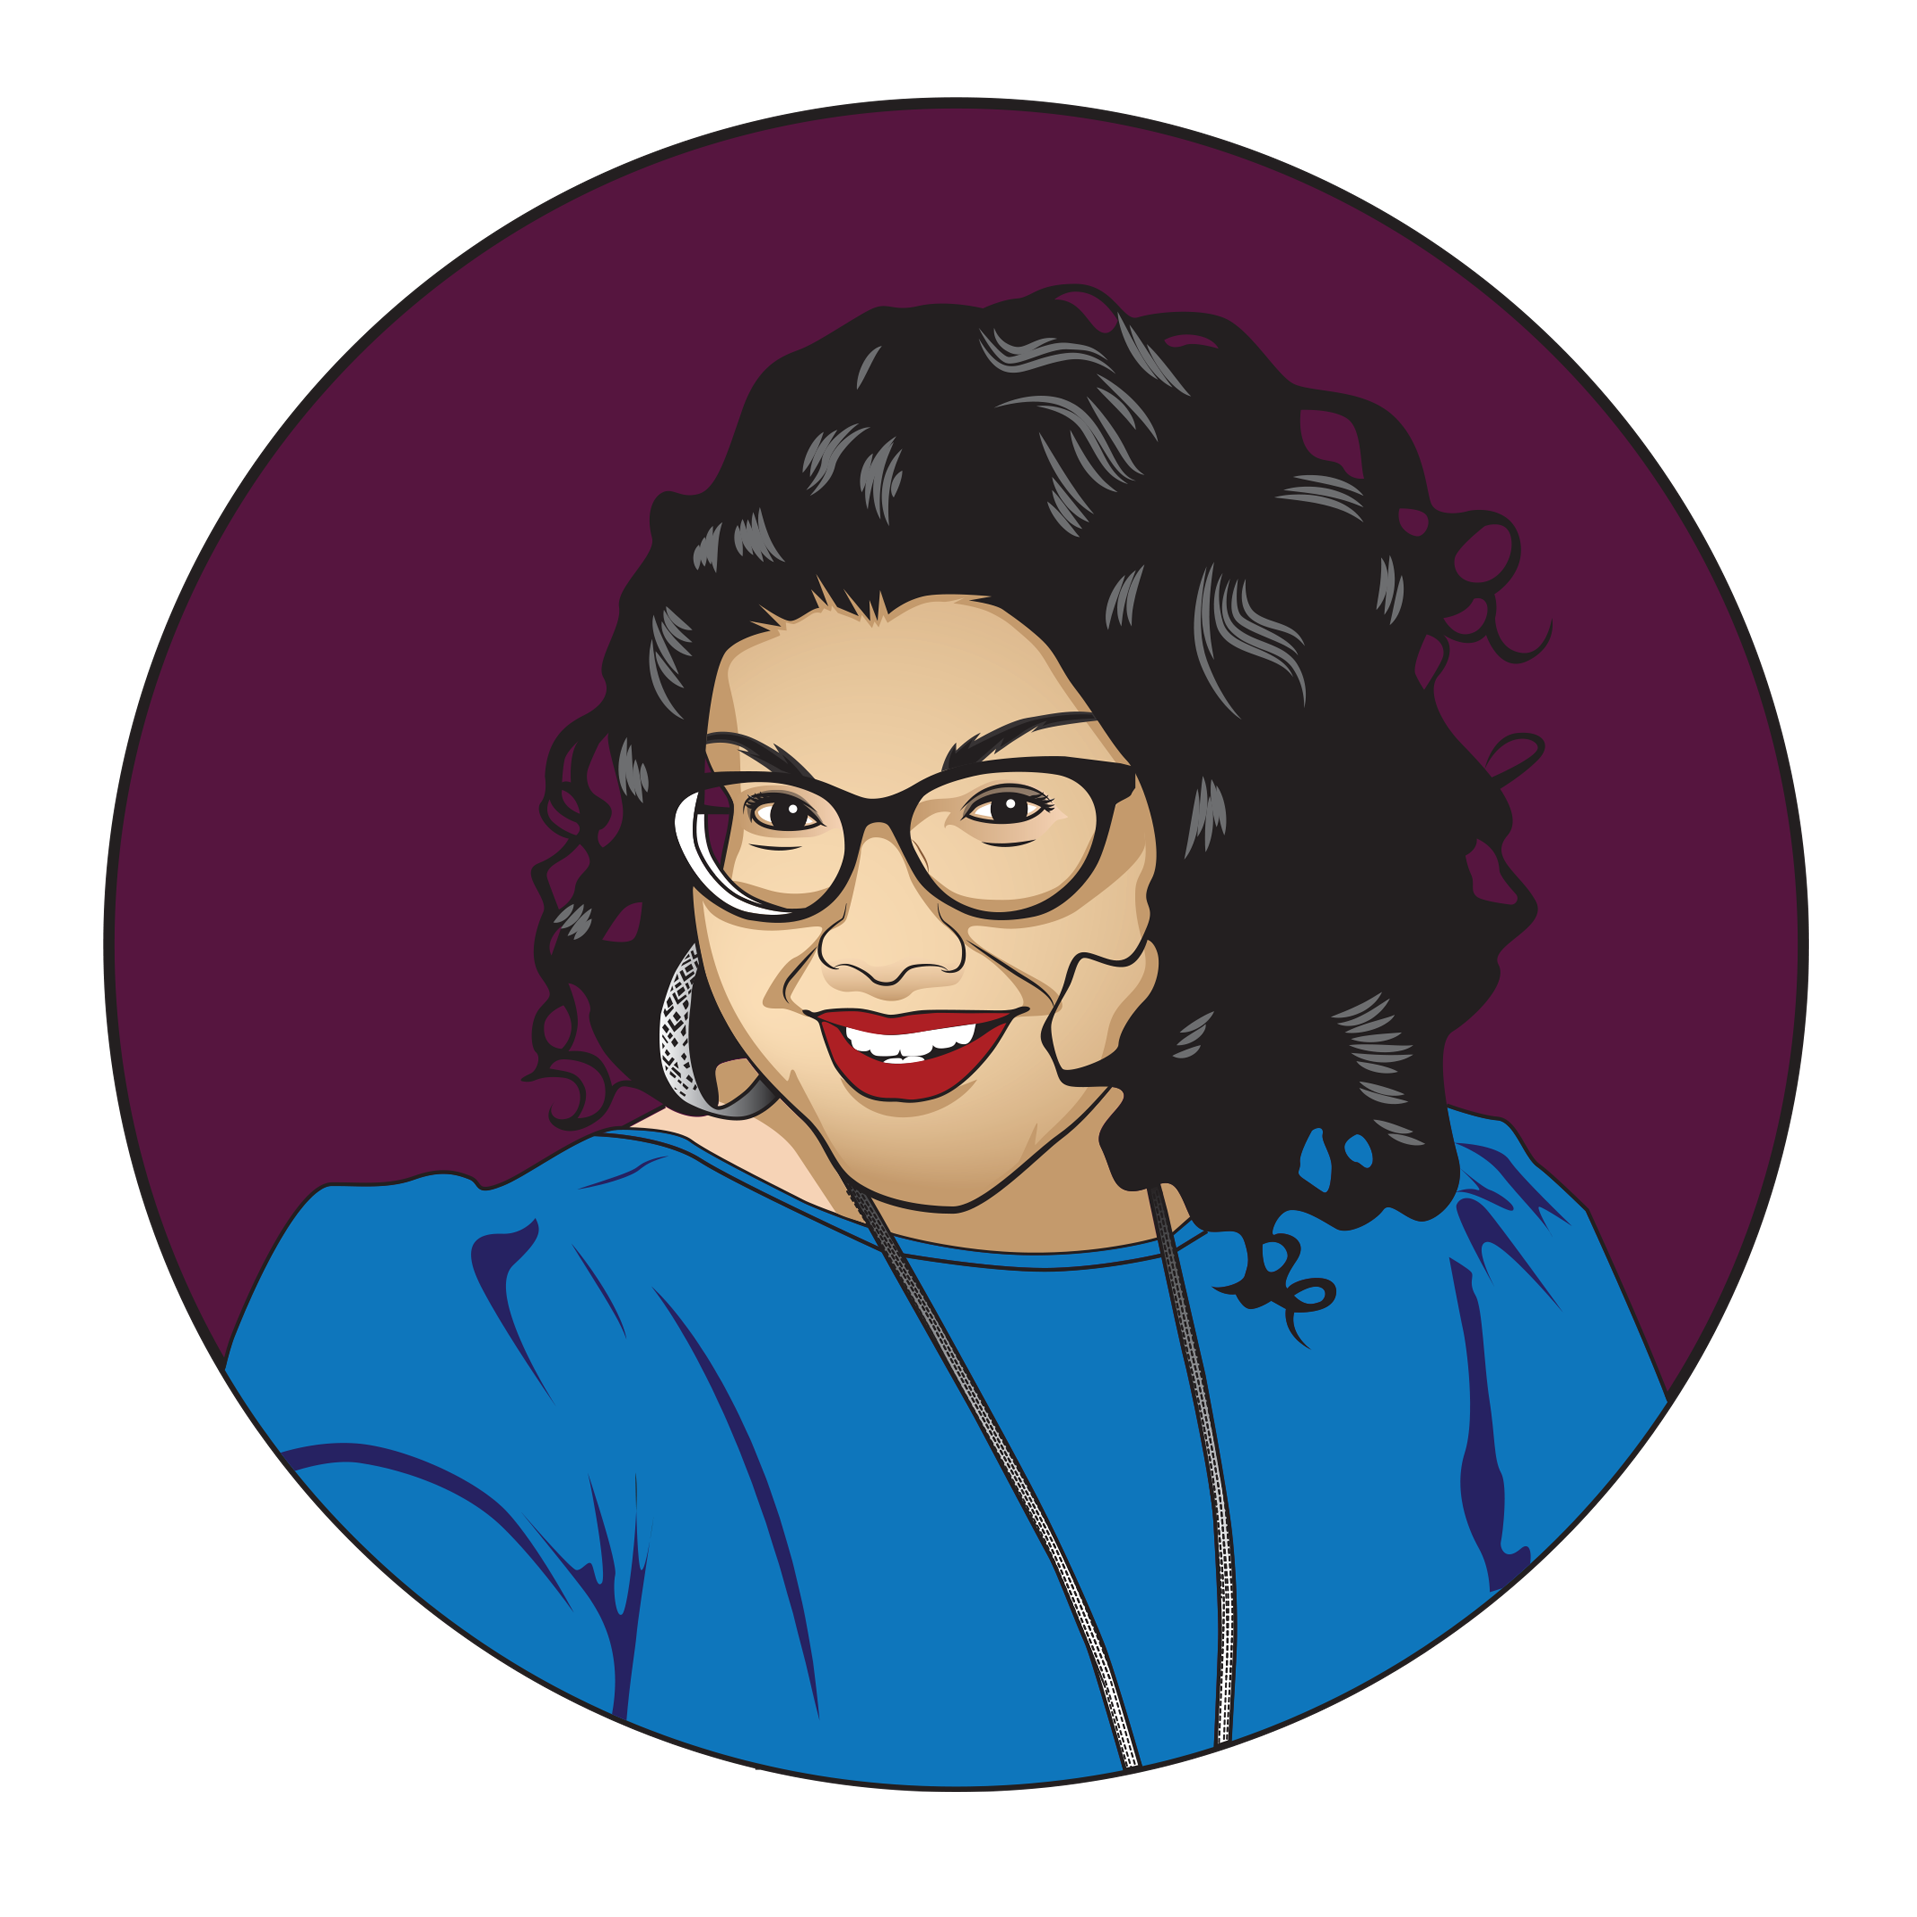 An illustrated image of Amy. She is wearing a blue dress, gold necklace, black rimmed glasses and silver hoops. She has black hair and is wearing red lipstick. Her image is on a burgundy background.